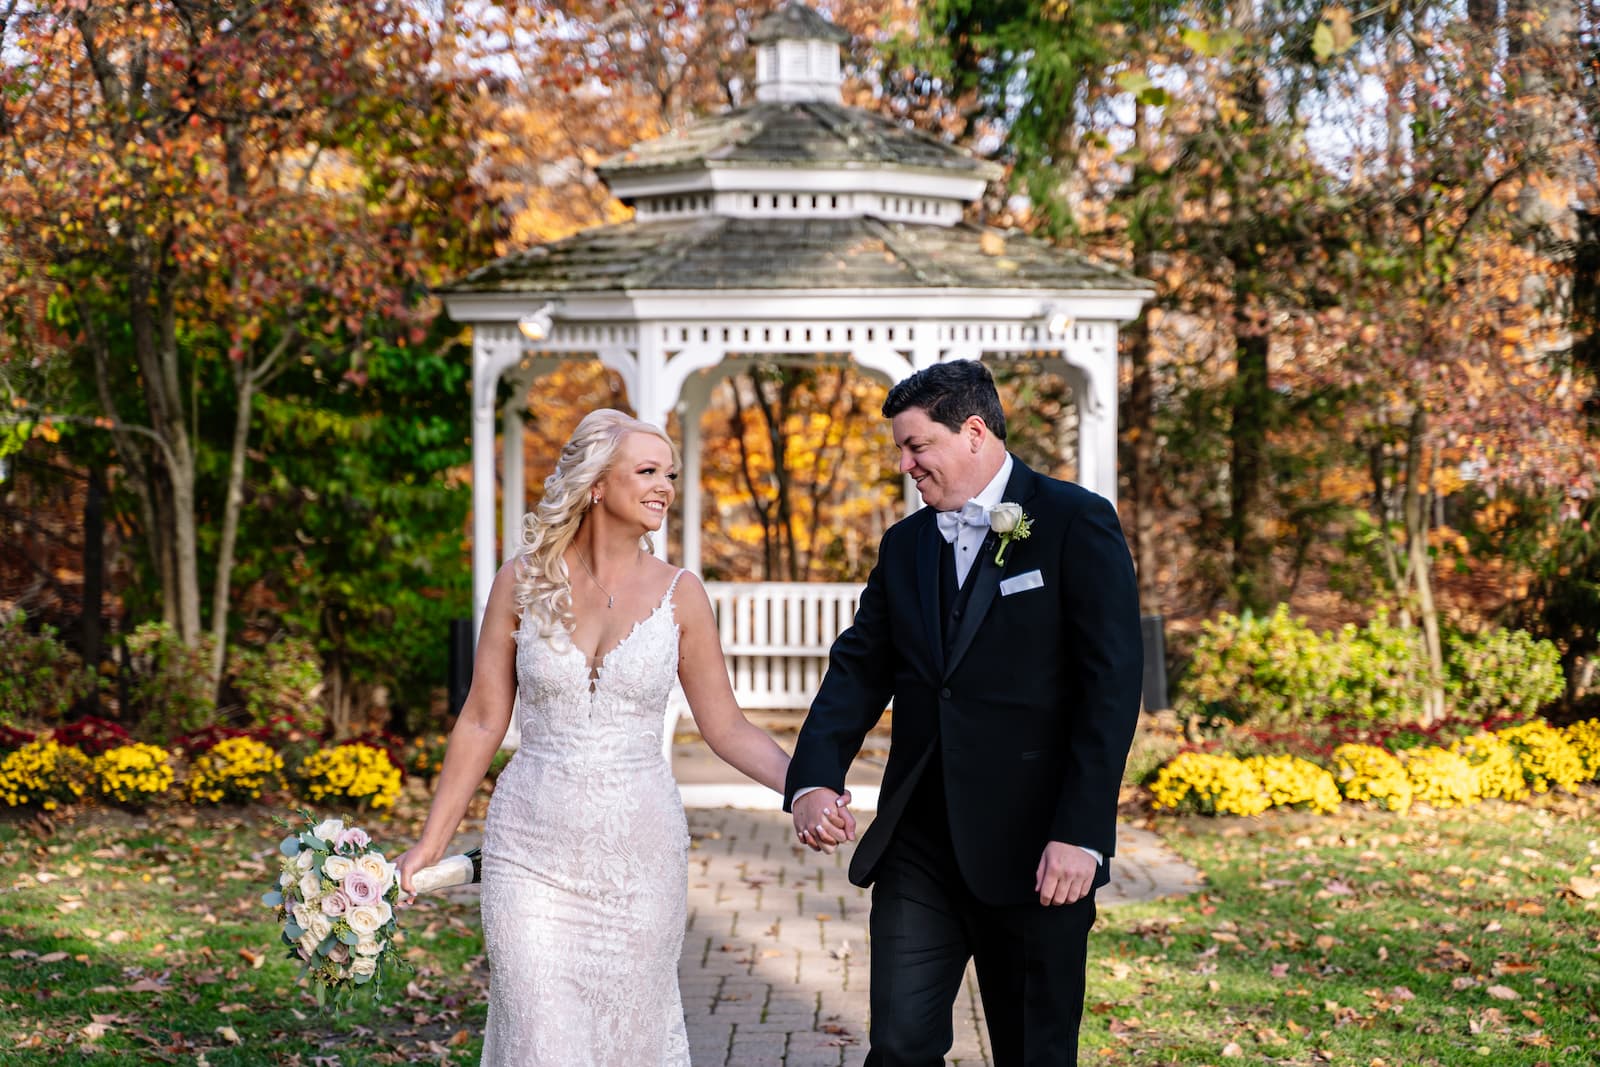 The couple hold hands and smile as they walk down a stone path with a white gazebo in the background and orange and green trees.